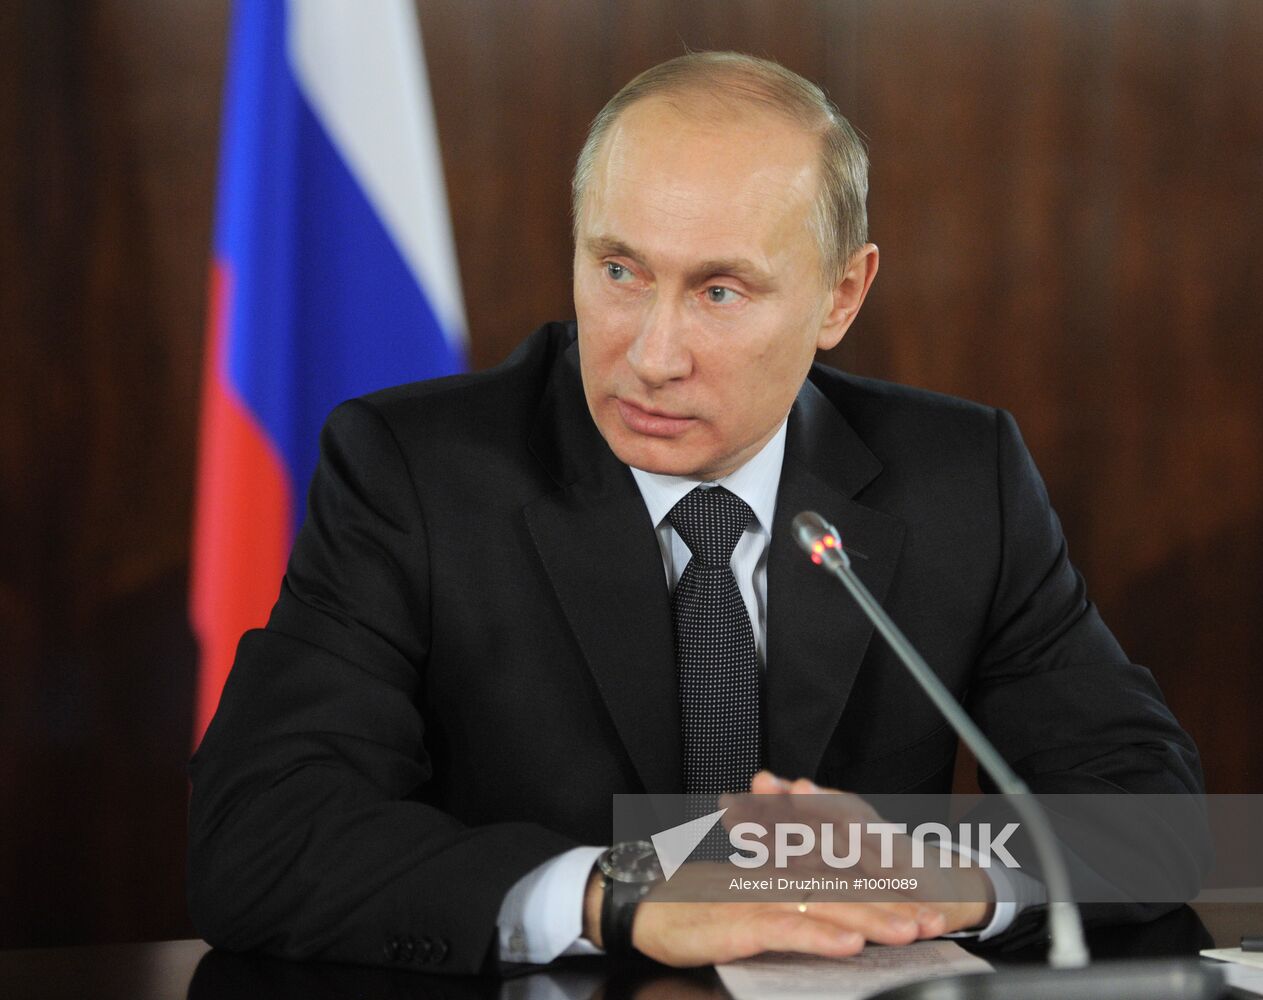 Vladimir Putin chairs All-Russia People's Front council meeting